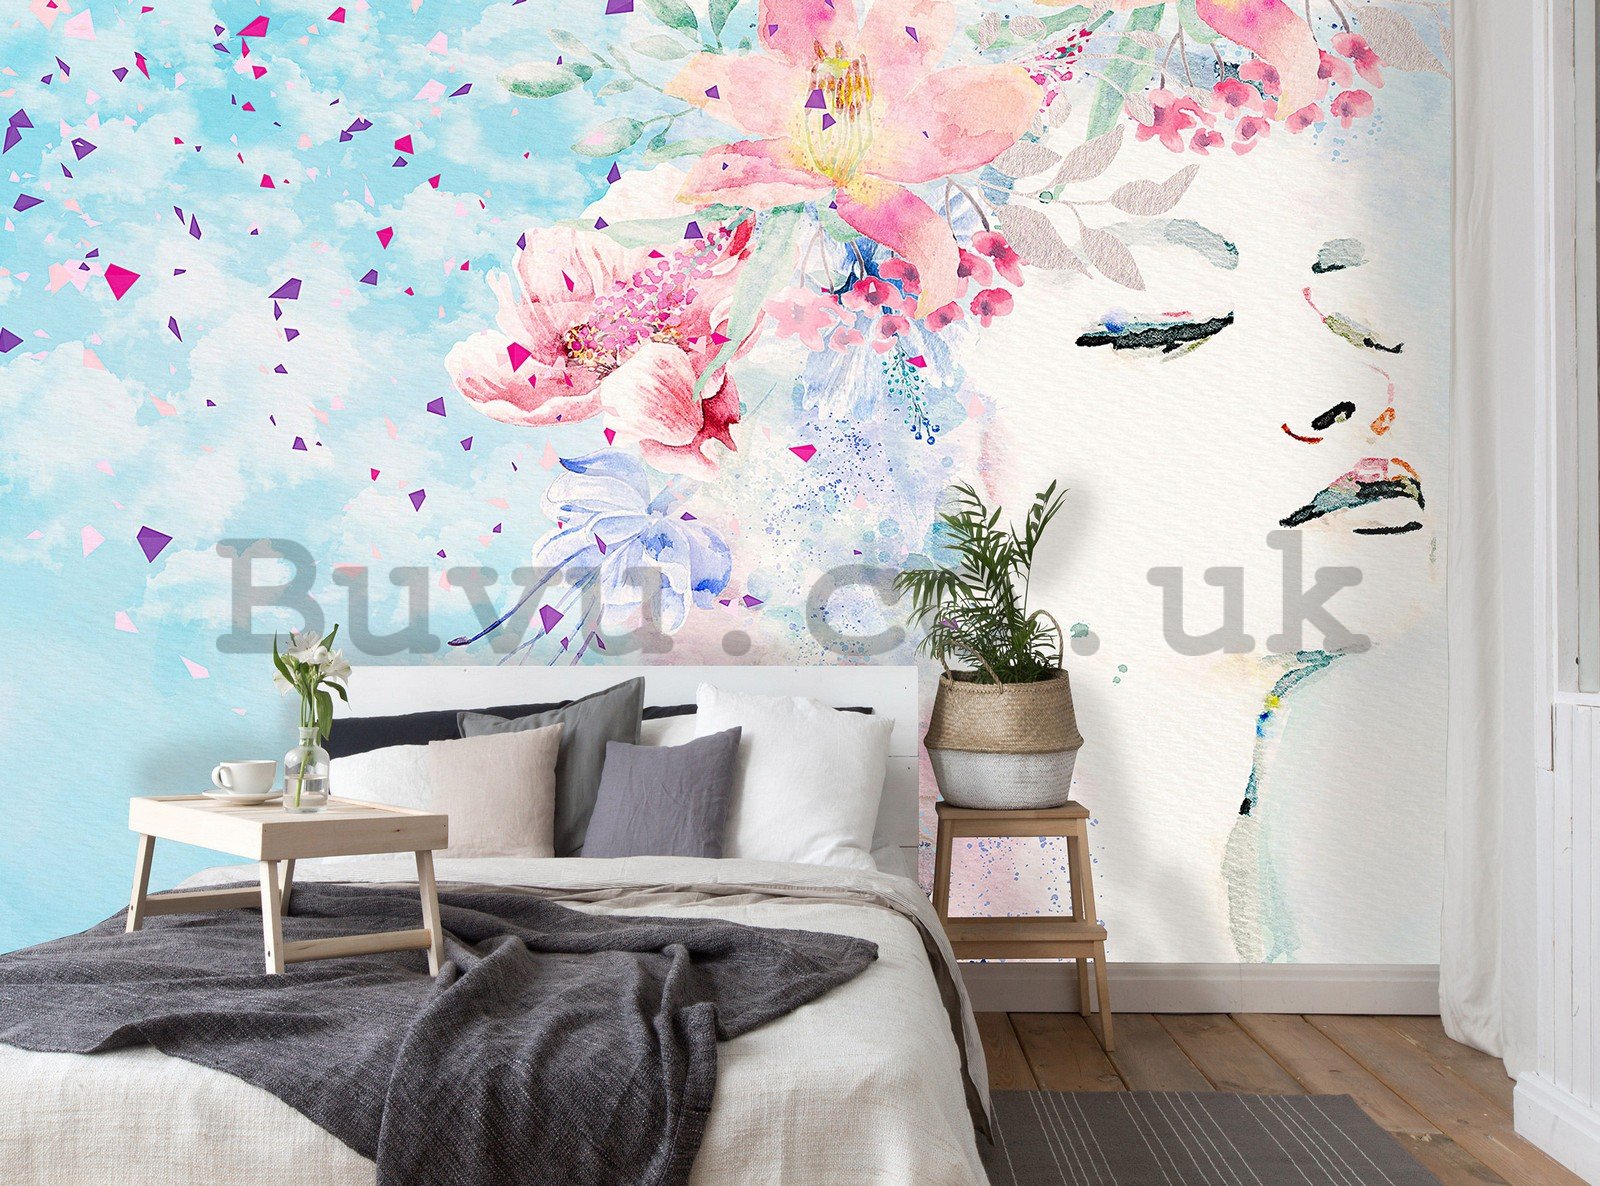 Wall mural vlies: Woman with flowers - 416x254 cm